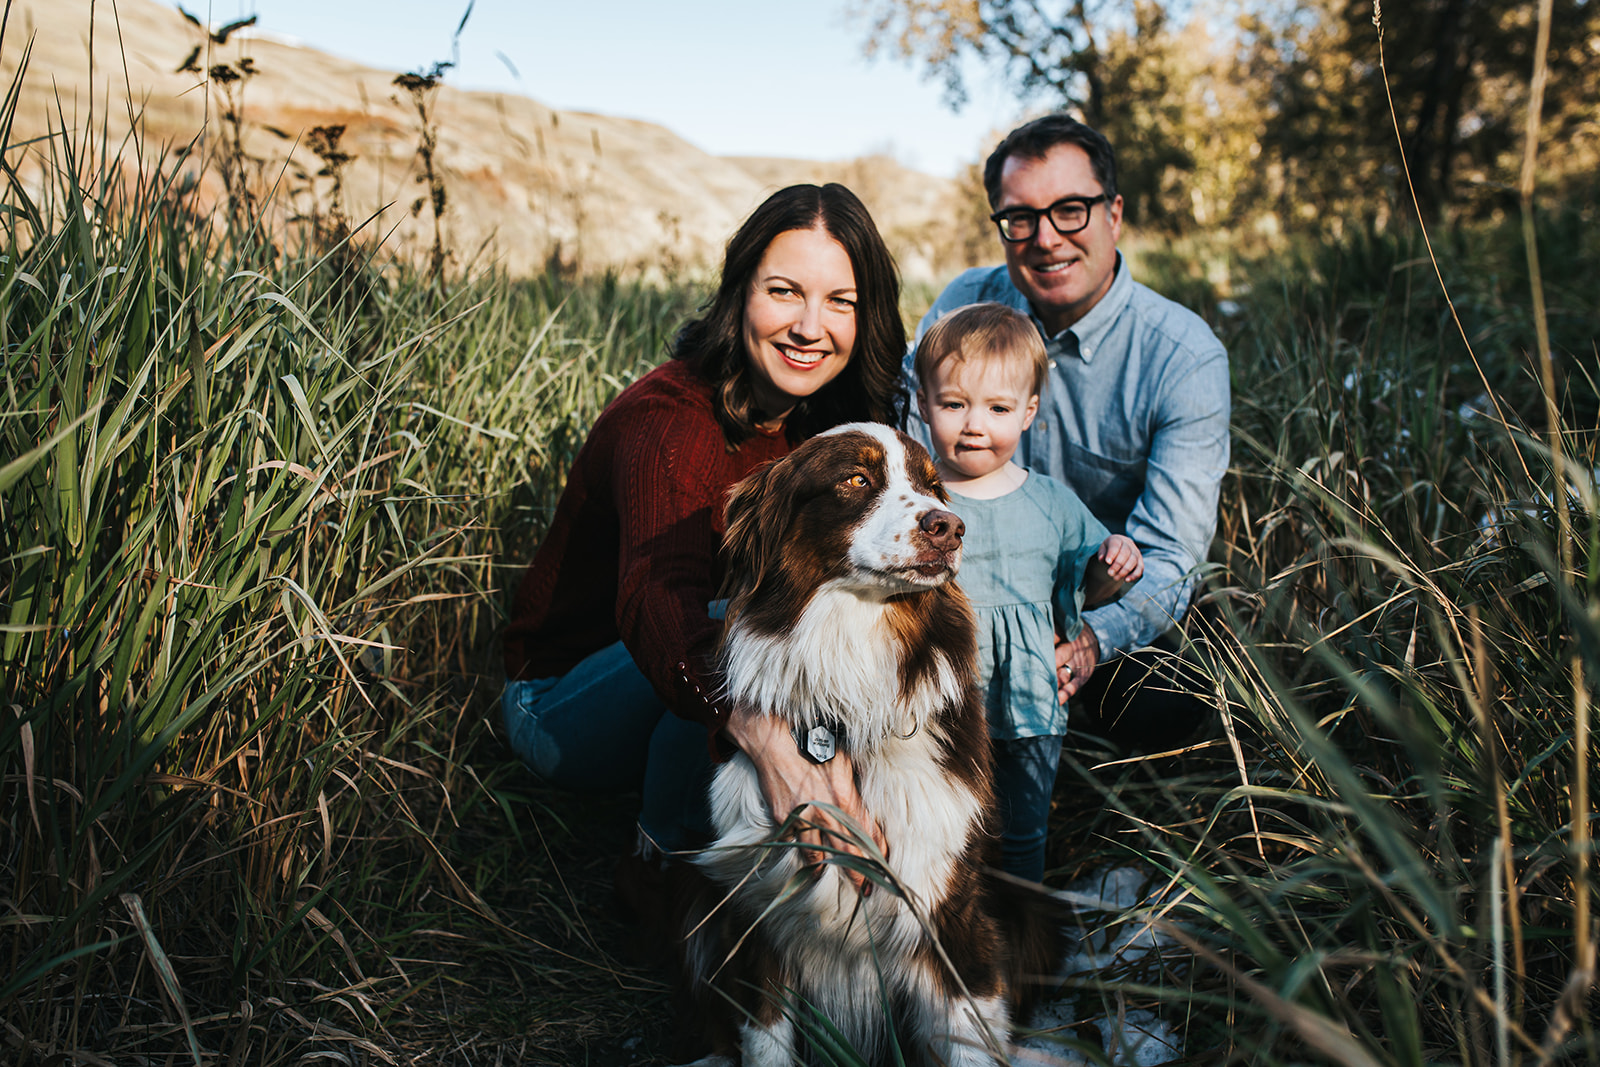 Including Dogs in Your Family Photo Session